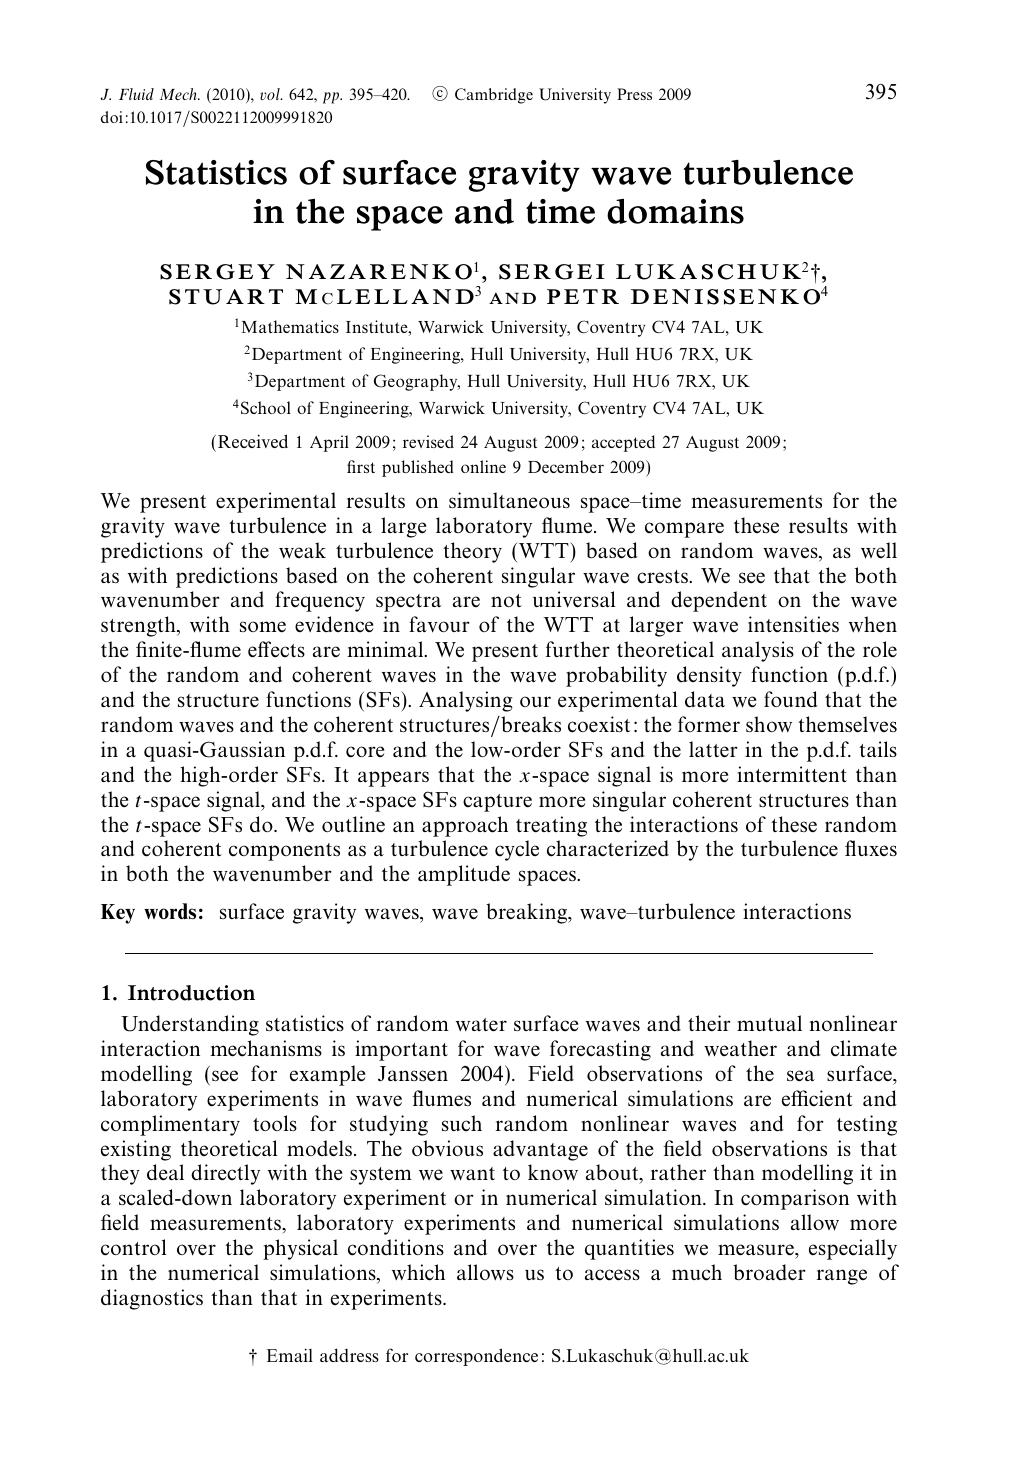 Statistics of surface gravity wave turbulence in the space and time domains by SERGEY NAZARENKO SERGEI LUKASCHUK STUART McLELLAND PETR DENISSENKO